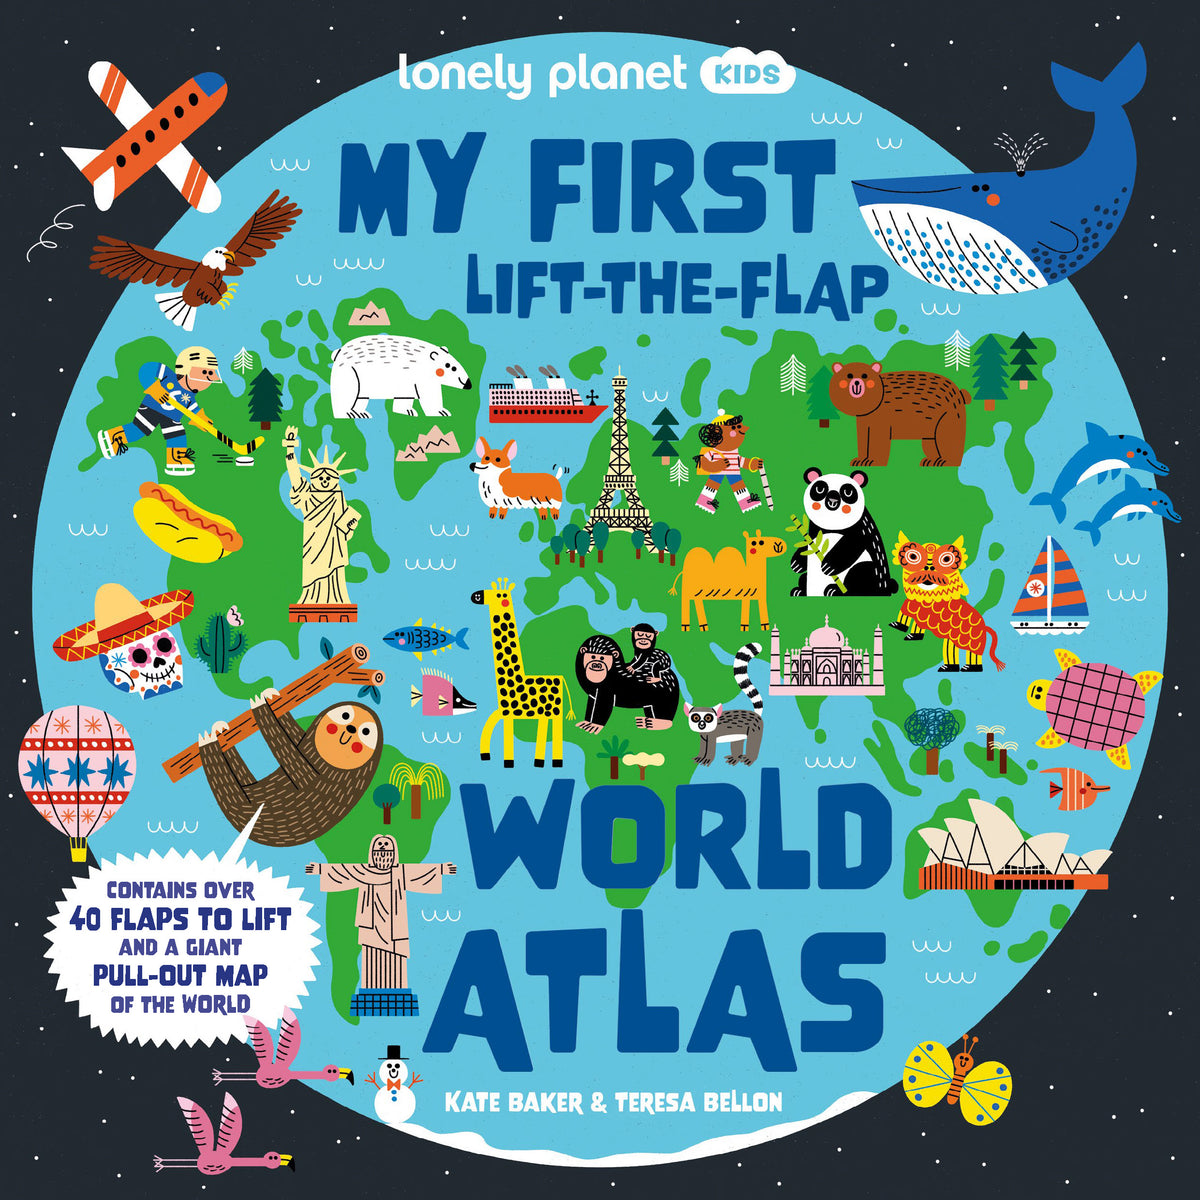 My First Lift-the-Flap World Atlas (North and South America edition)